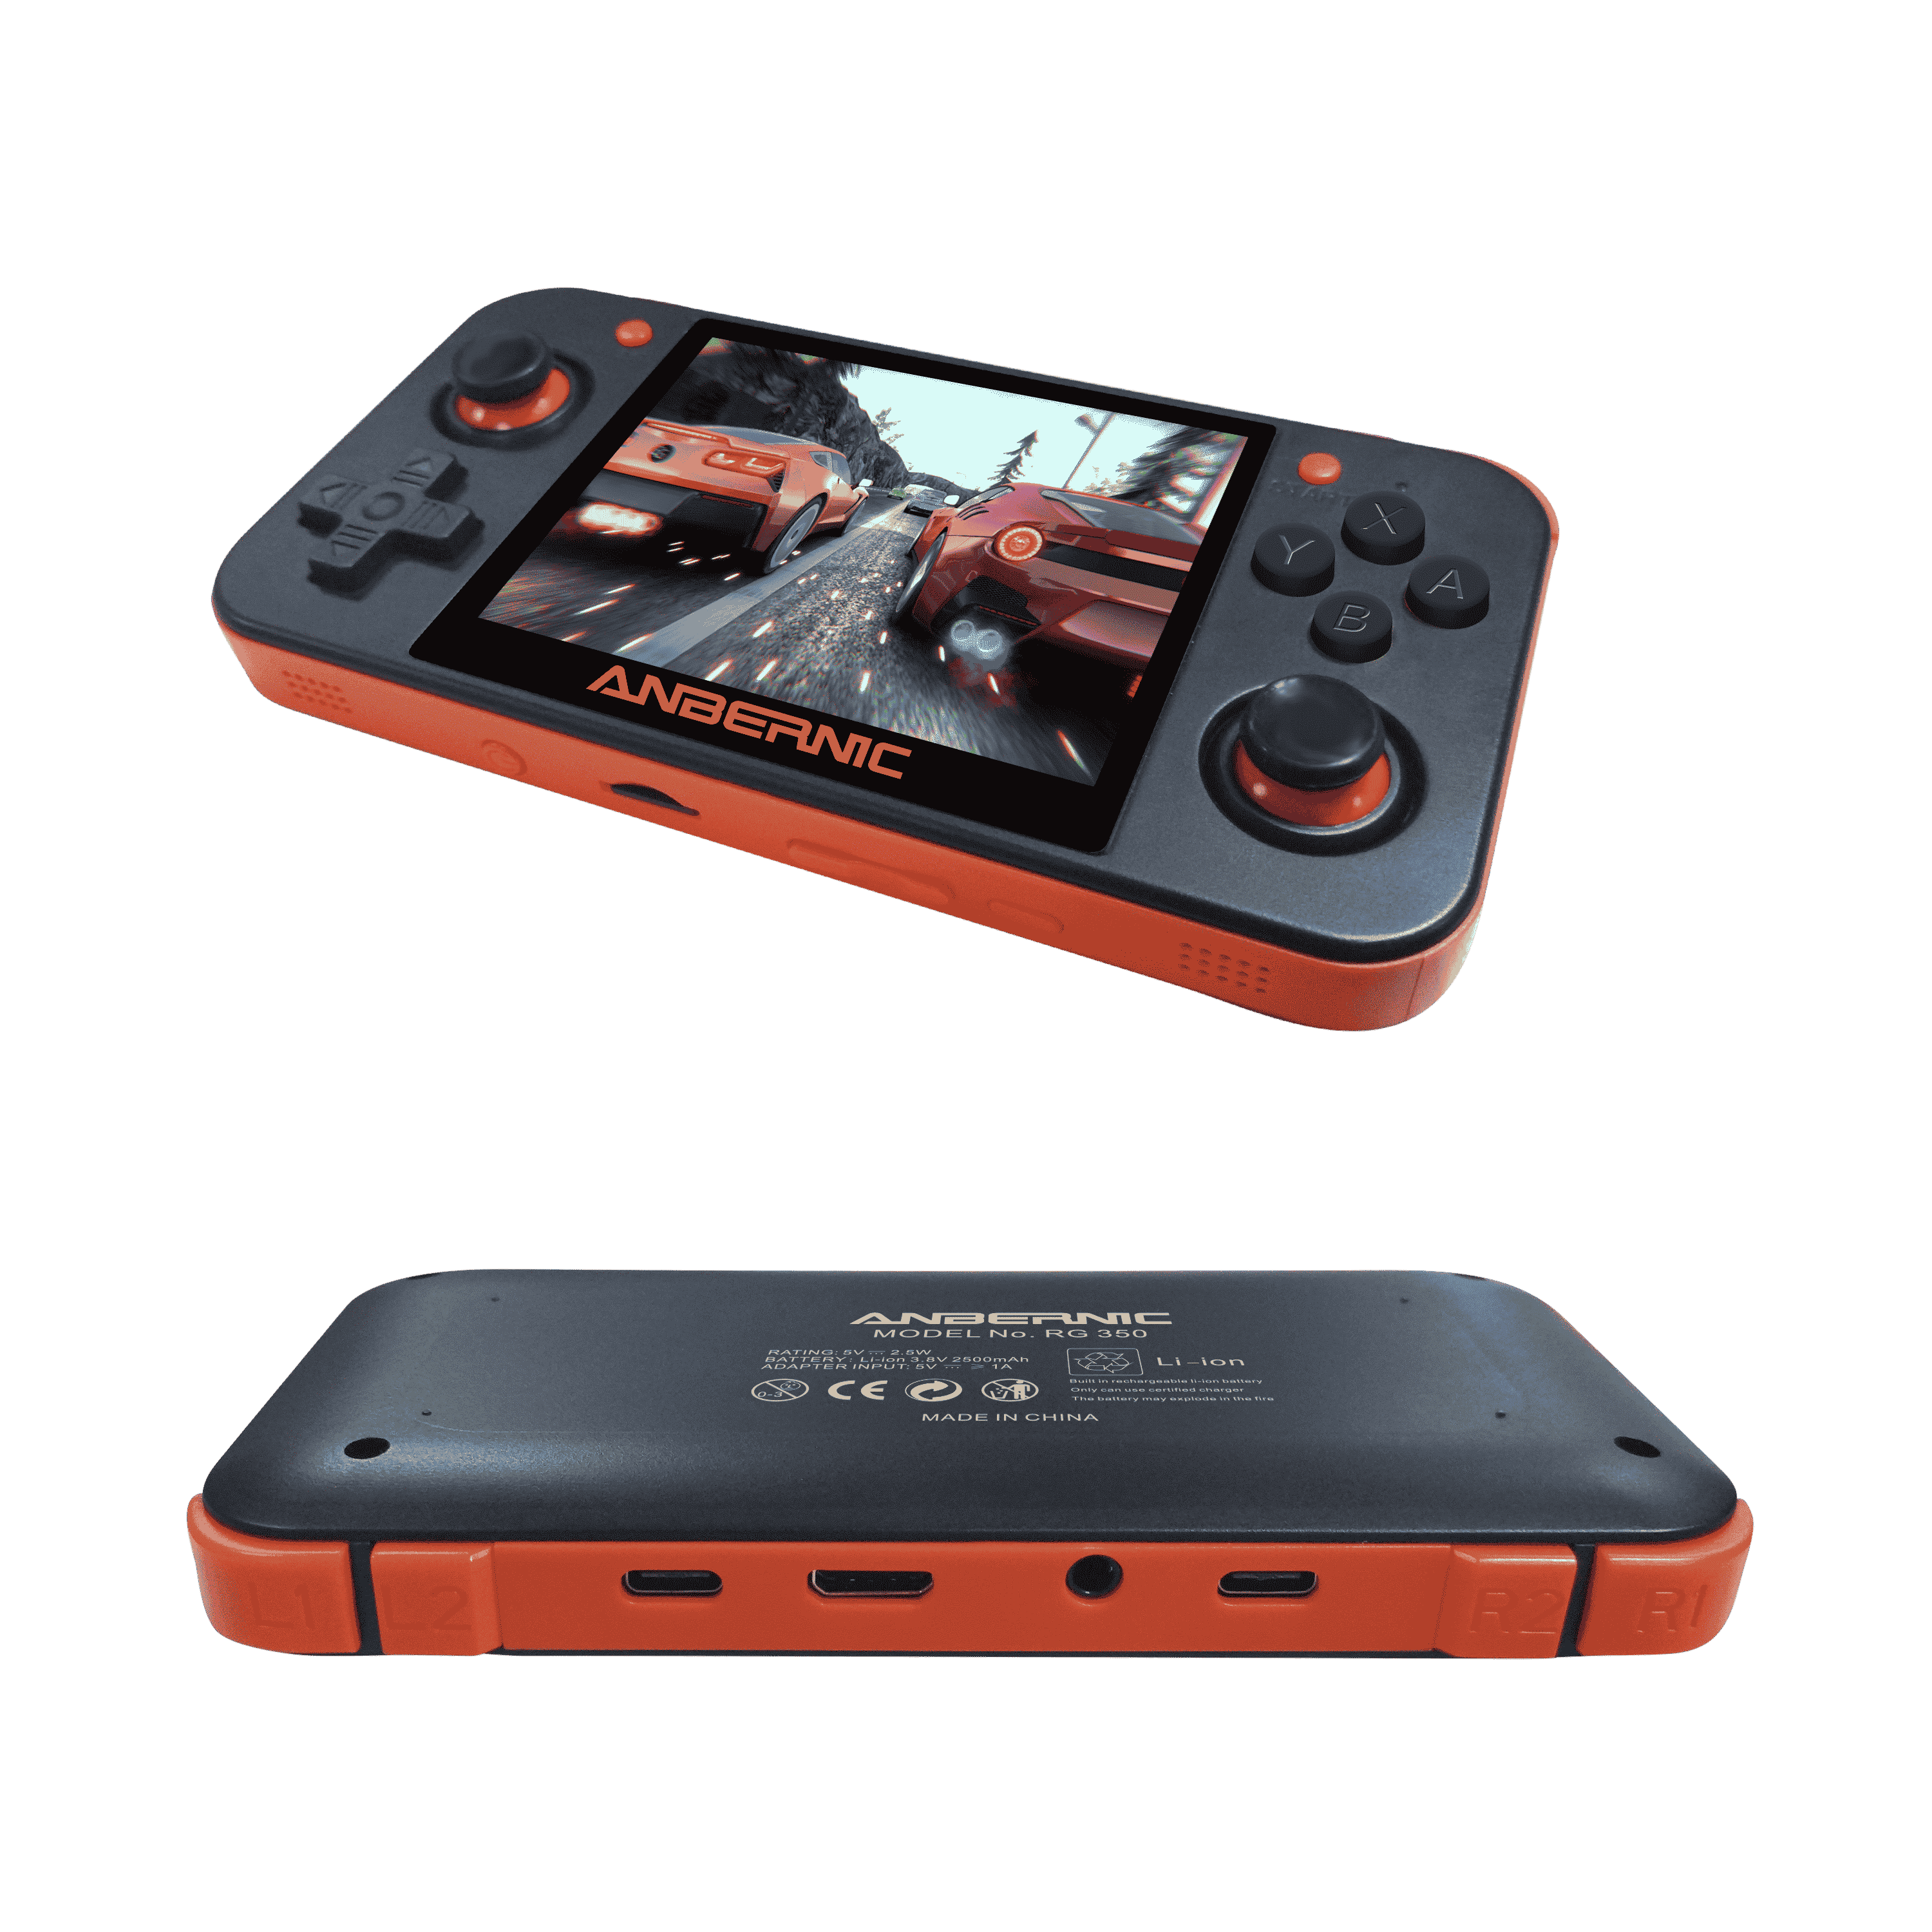 DroiX RetroGame RG350 Retro Gaming Handheld Console - Black showing Front and Back